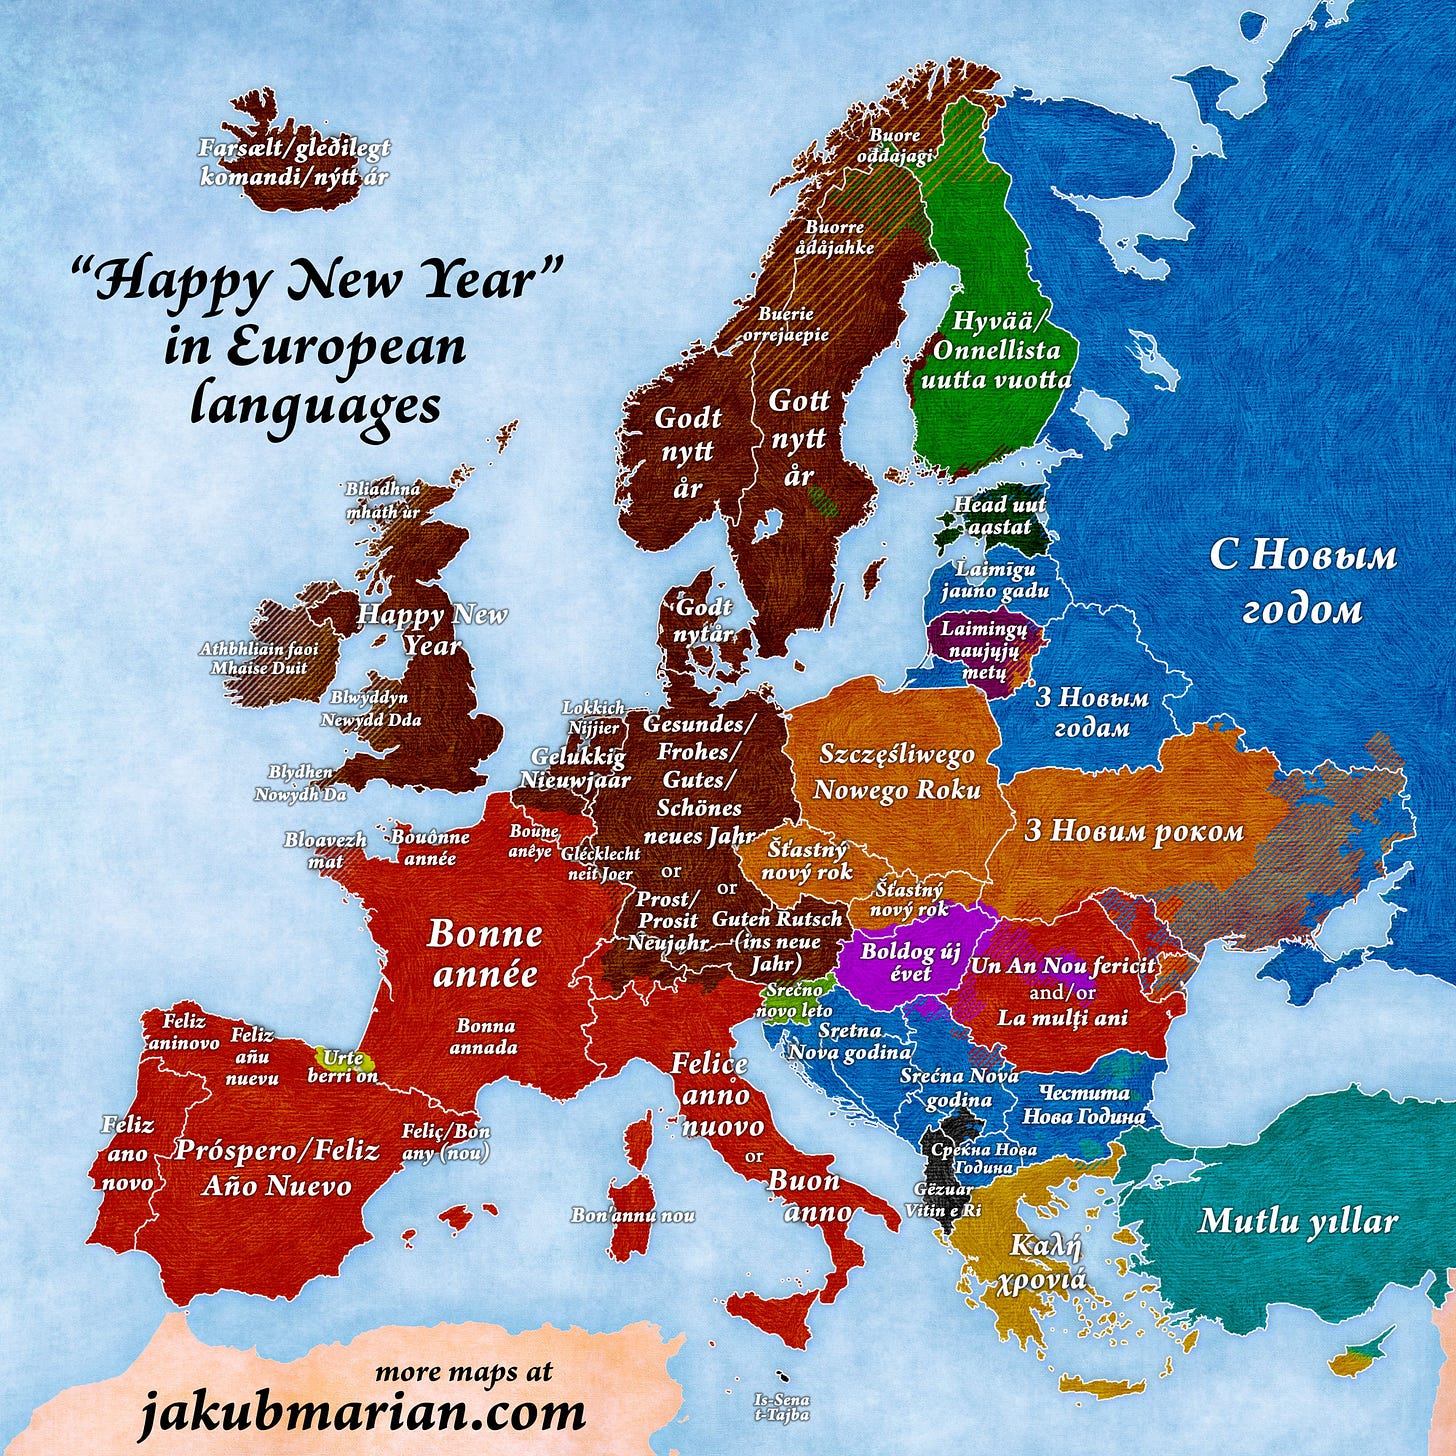 How to say “Happy New Year” in European languages (from Jakub Marian).